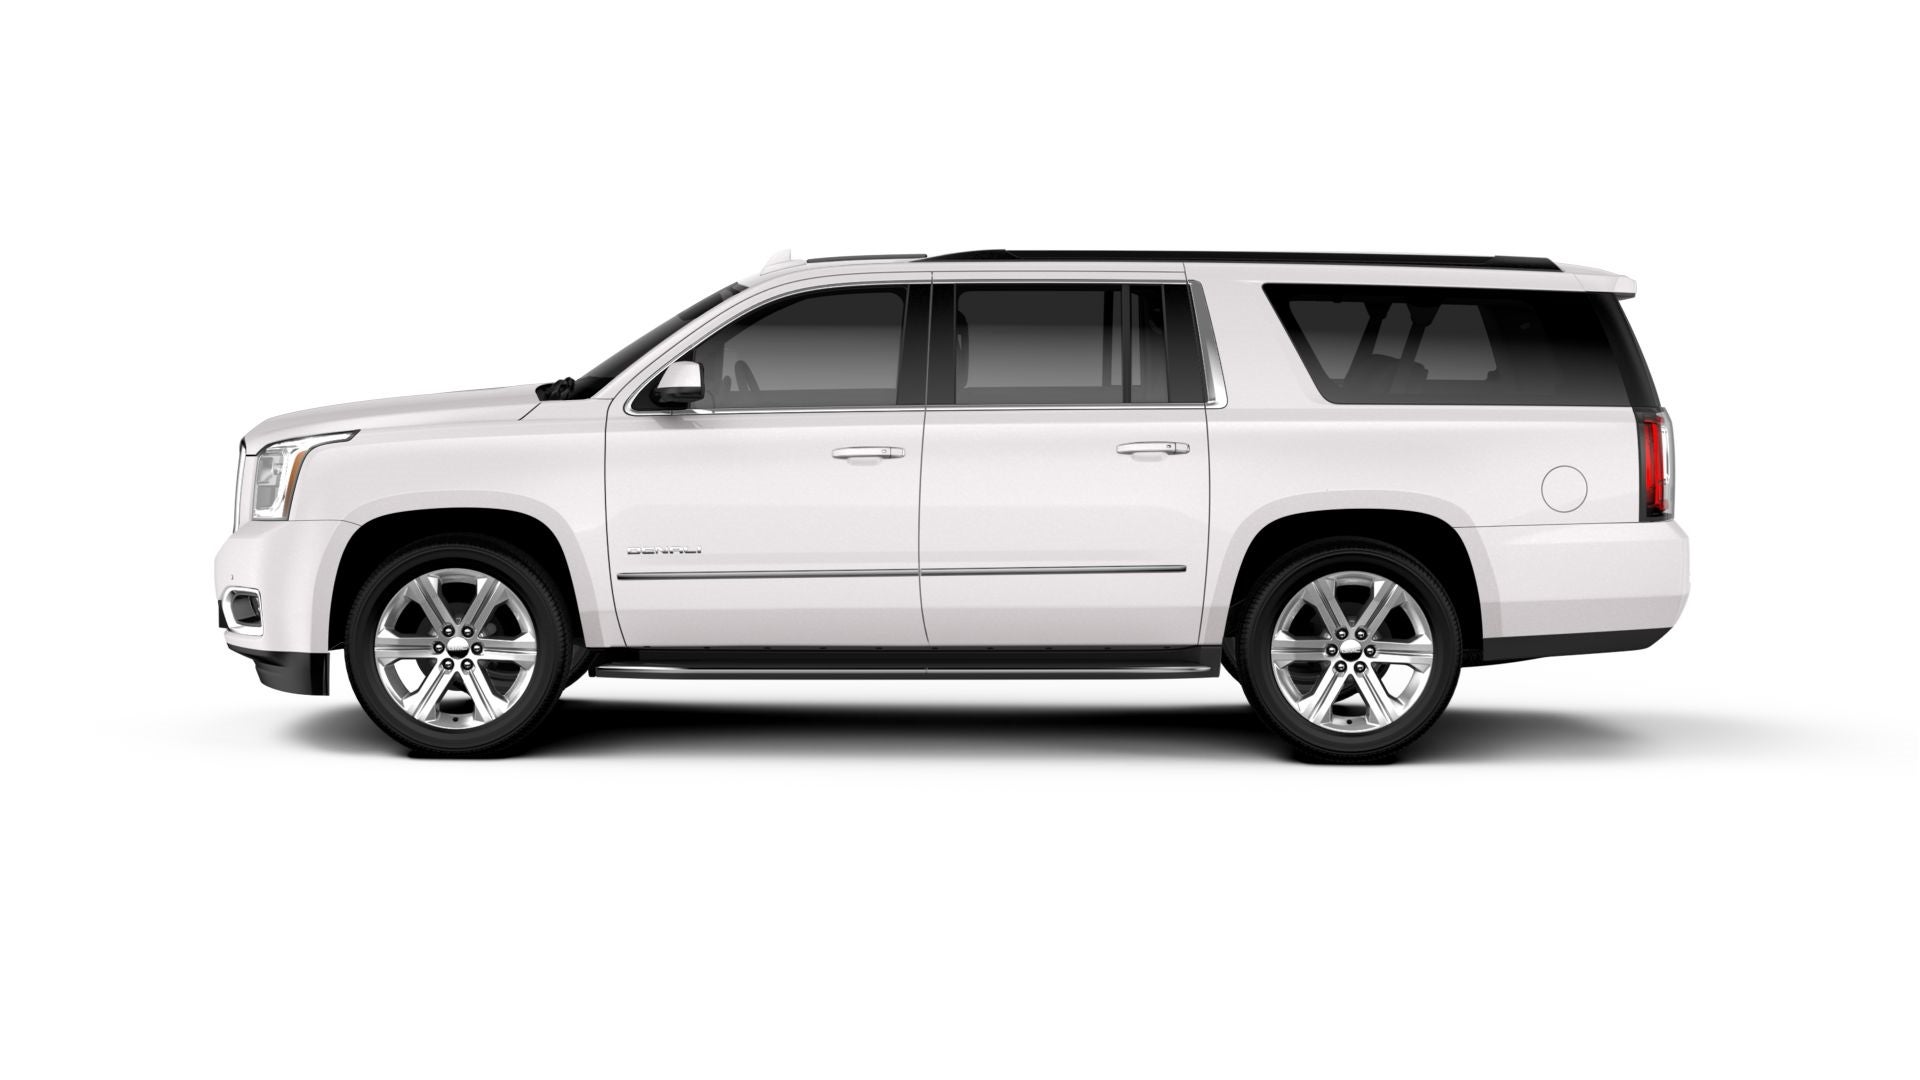 Used 2017 GMC Yukon XL Denali with VIN 1GKS2HKJ5HR205011 for sale in Apple Valley, Minnesota